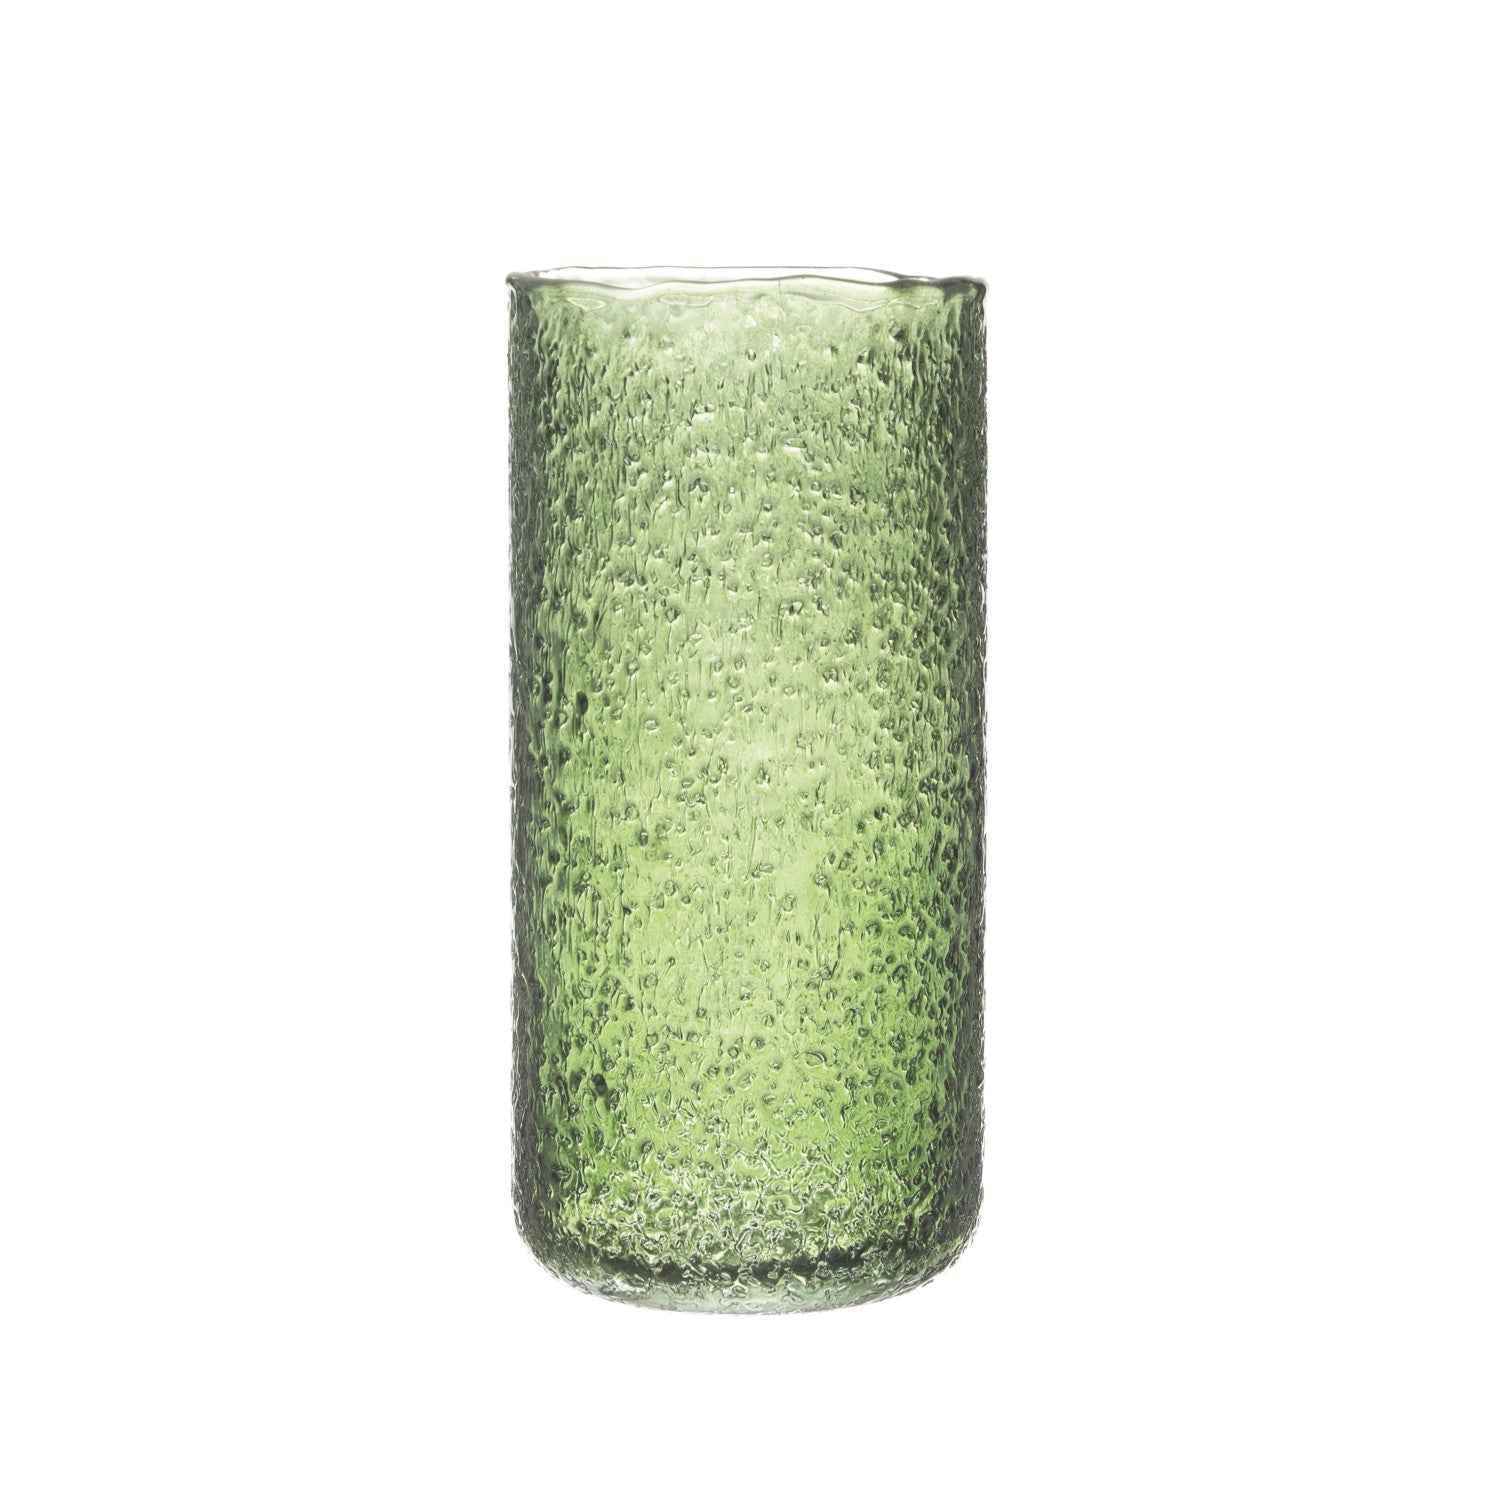 Beautiful textured green seeded glass vase or hurricane candle lantern 8.5 in. H by Creative Co-op